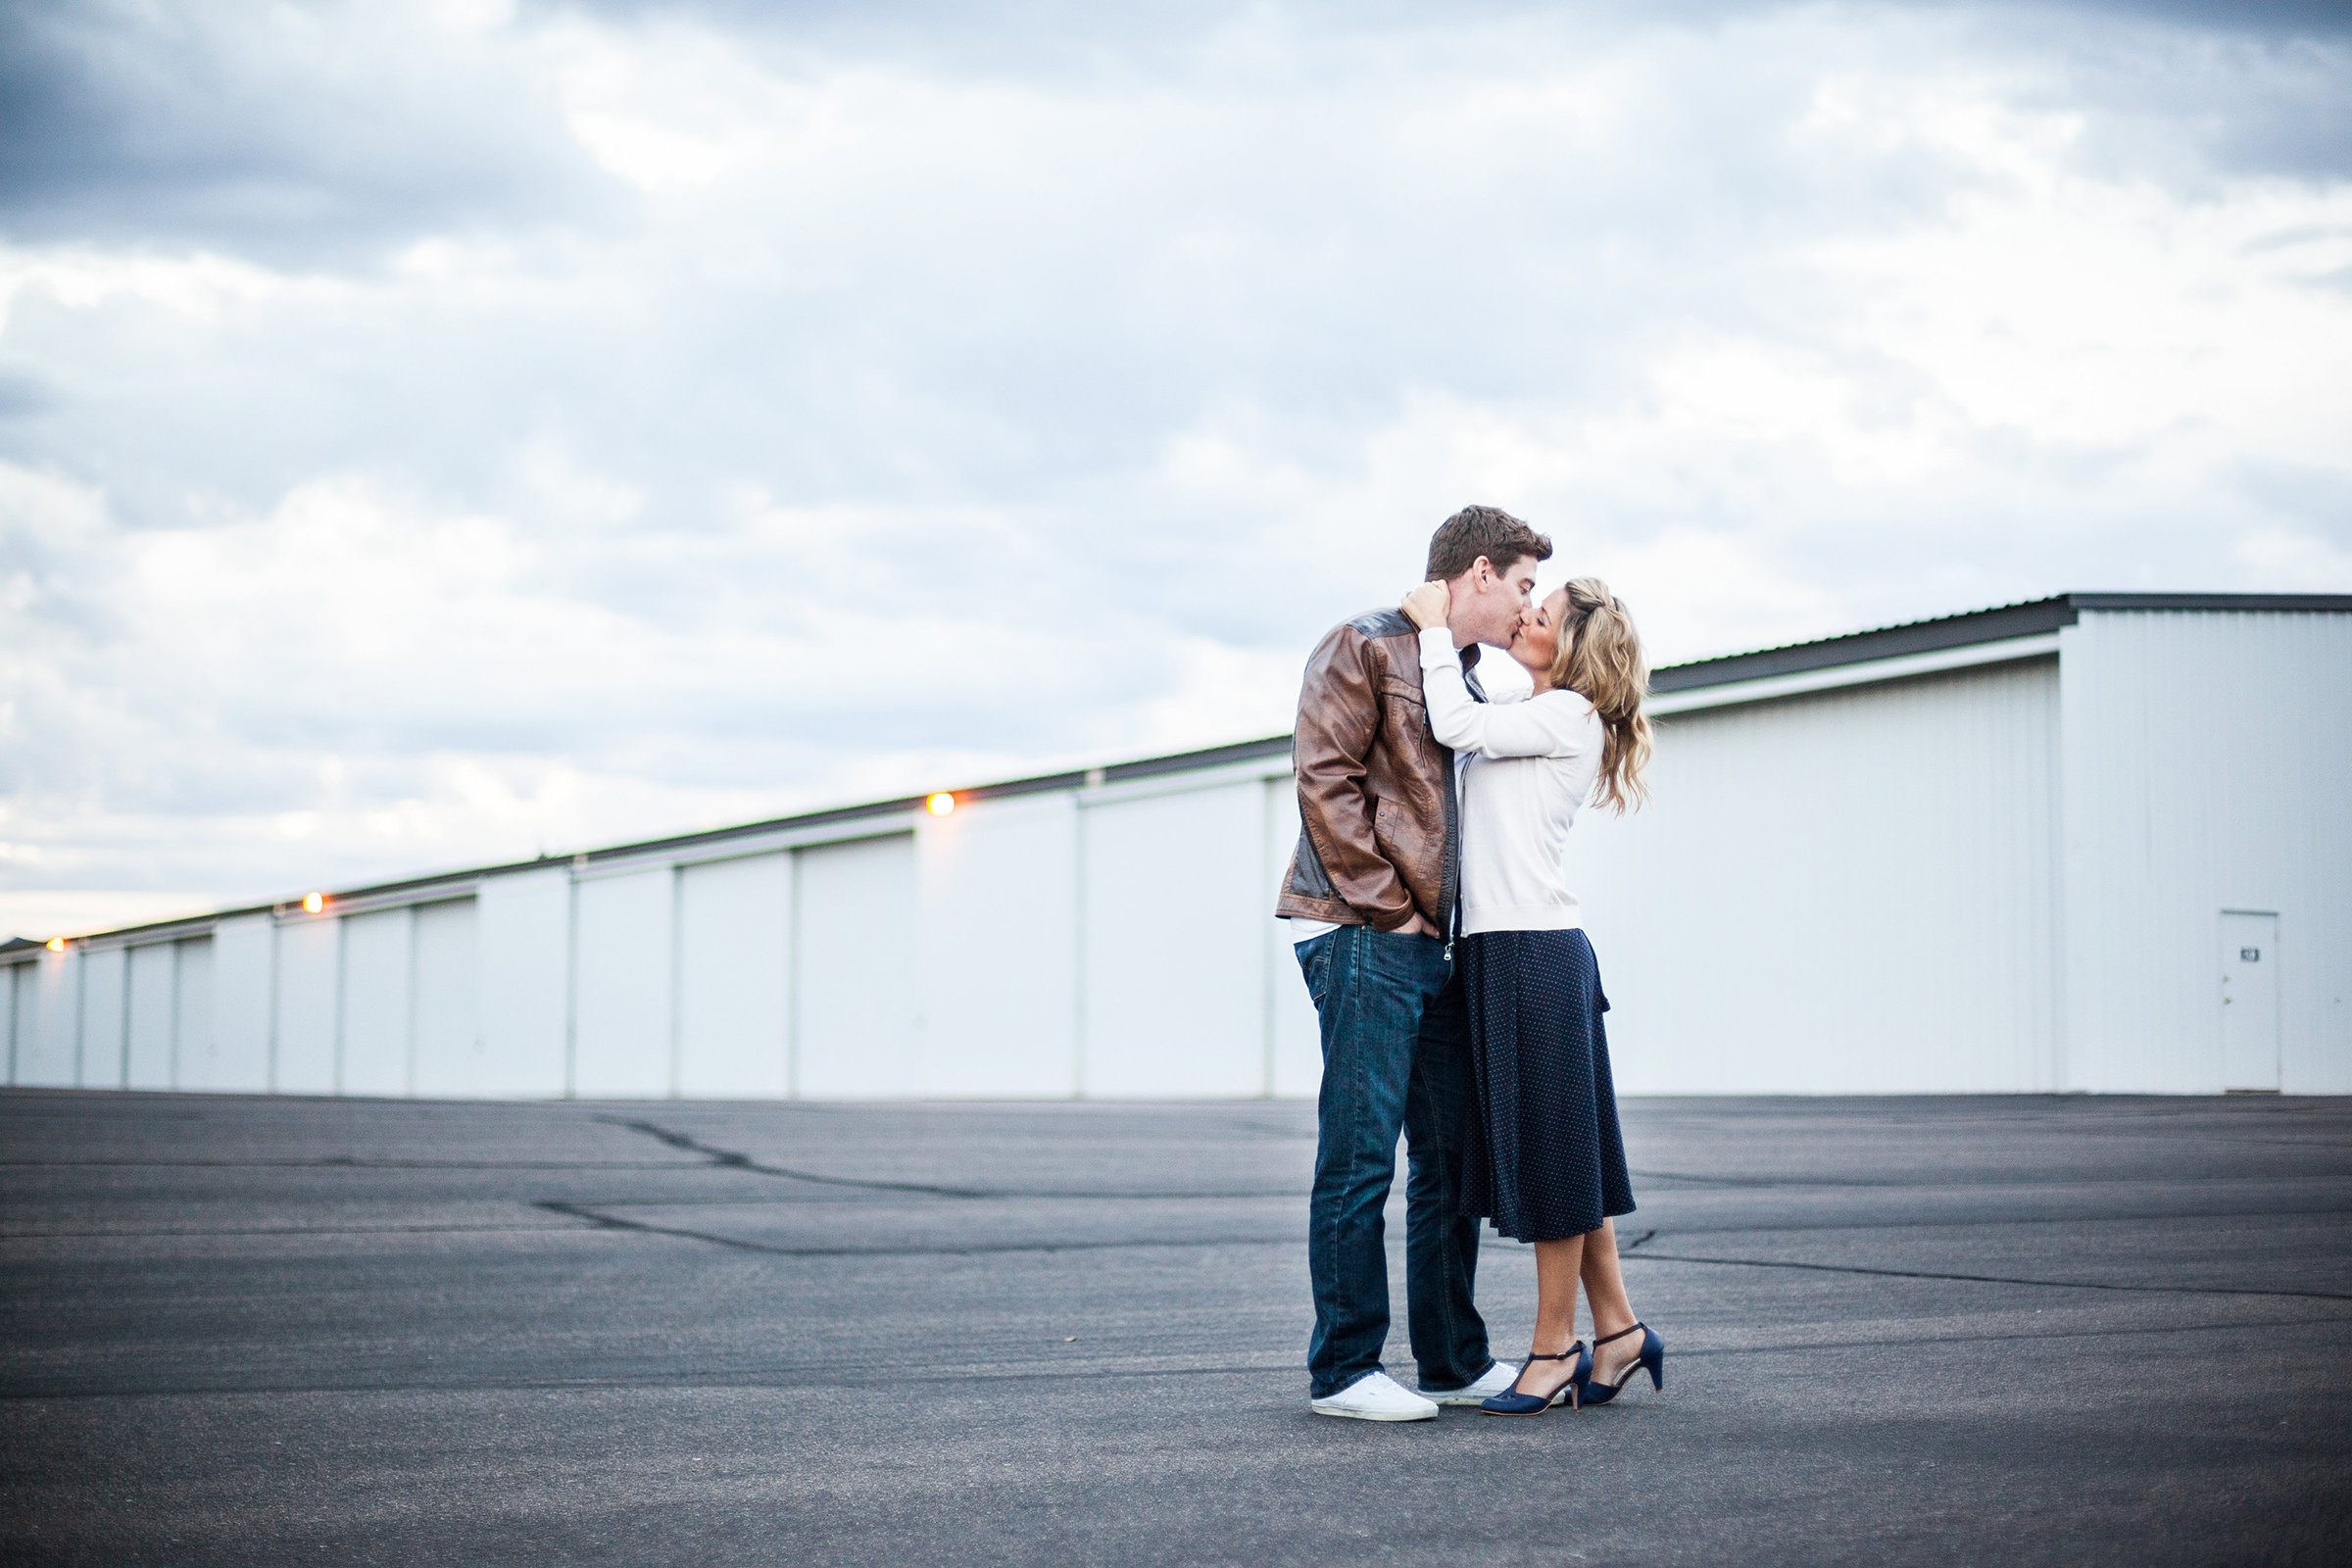 vintage styled couple kissing in airplane hangar alley